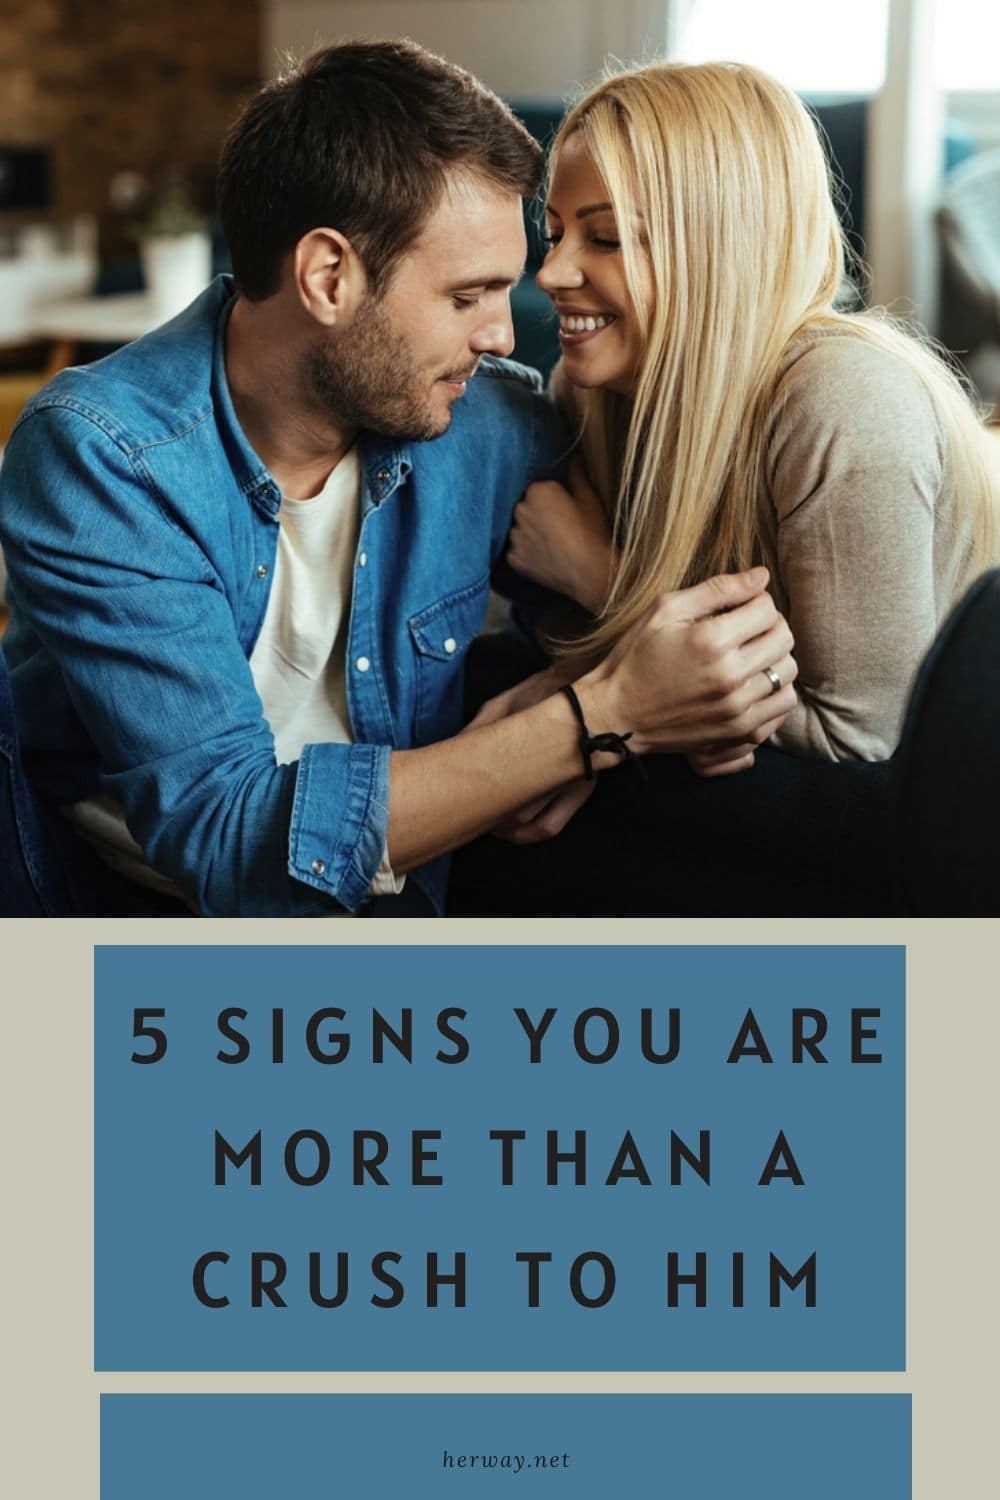 5 Signs You Are More Than A Crush To Him